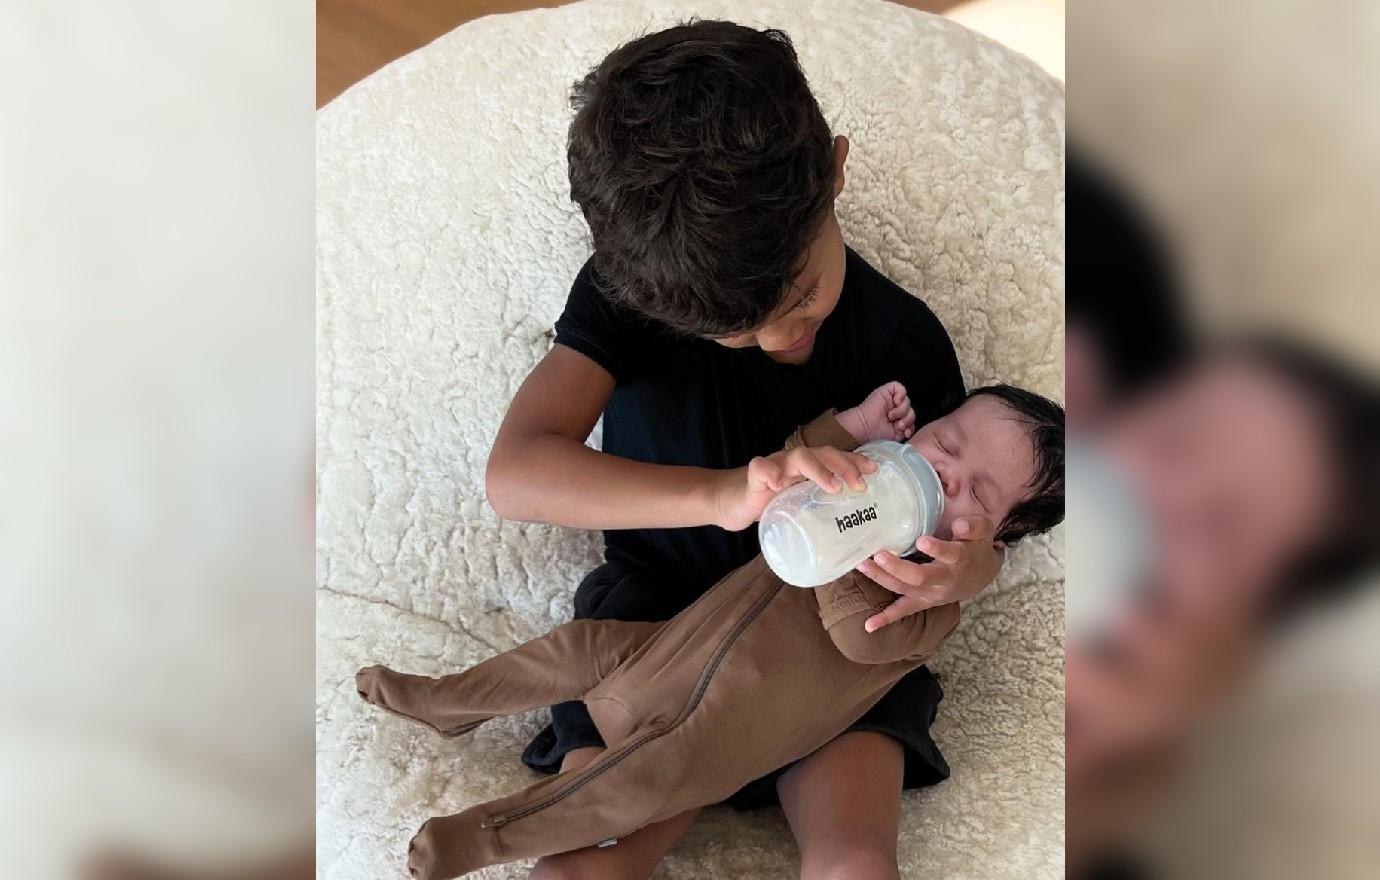 Chrissy Teigen says her son has 'never eaten a vegetable' - but that's  okay, says a parenting expert